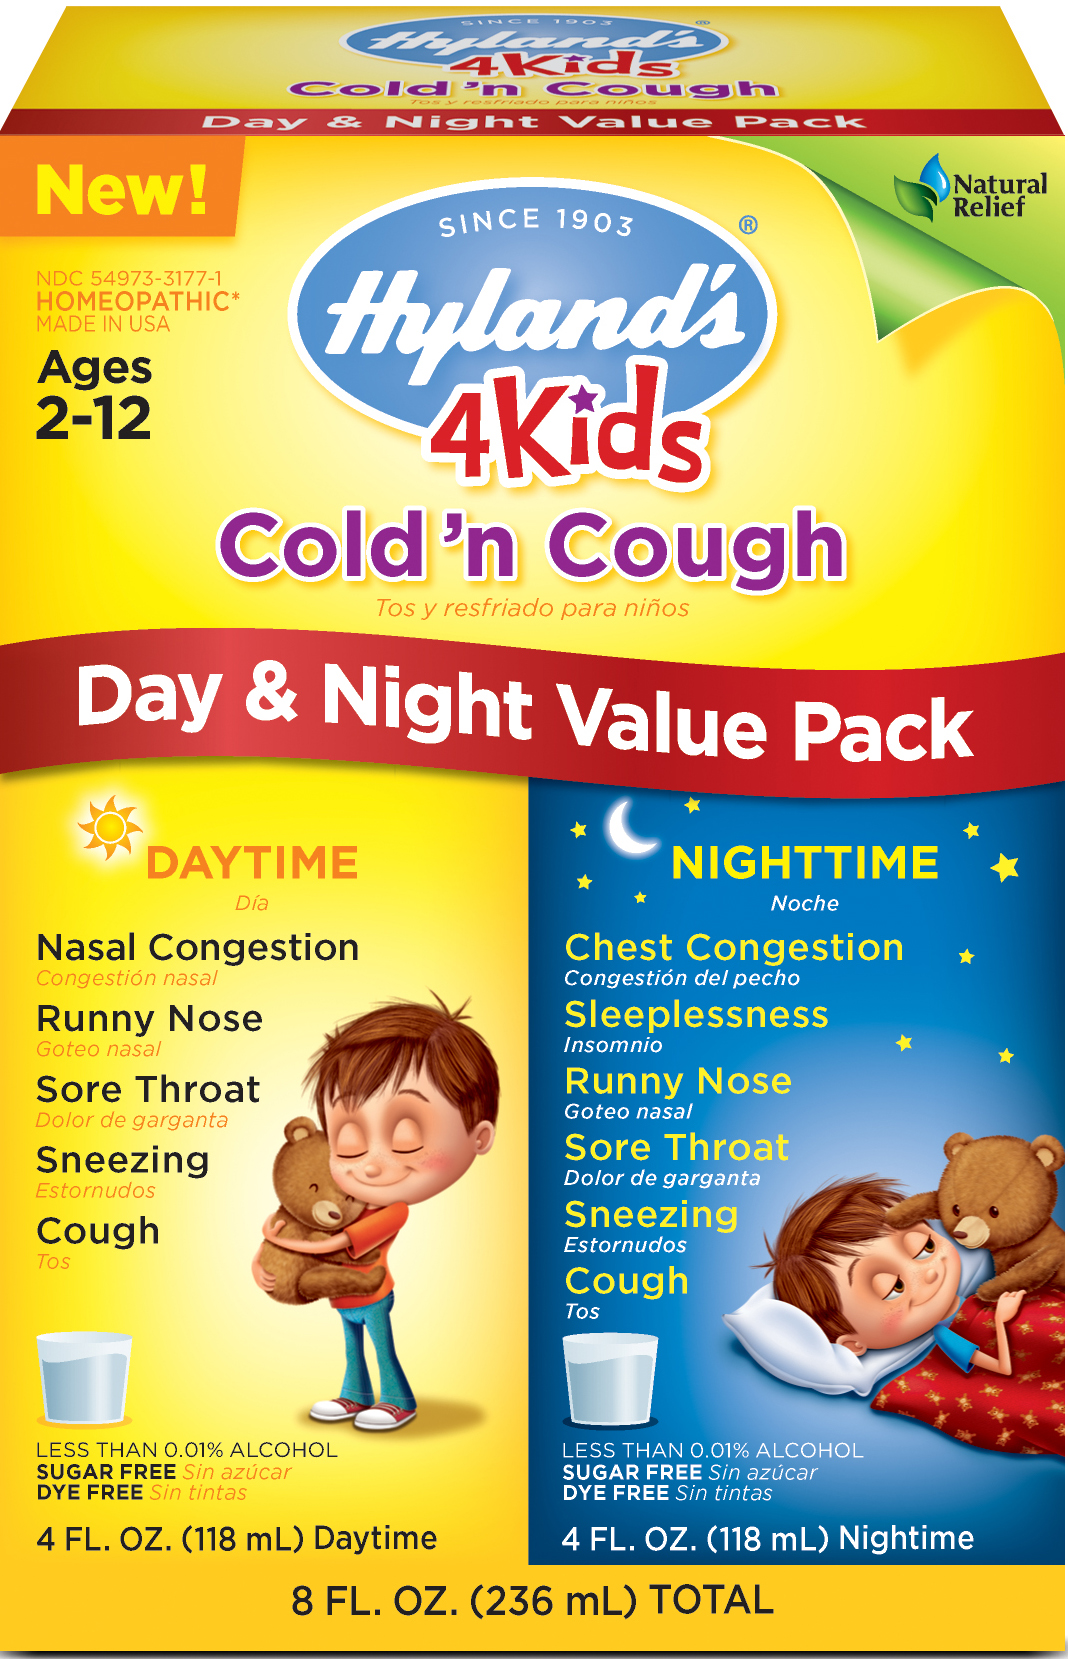 Hyland's 4 Kids Cold 'n Cough Day & Night Value Pack by Hyland's Inc